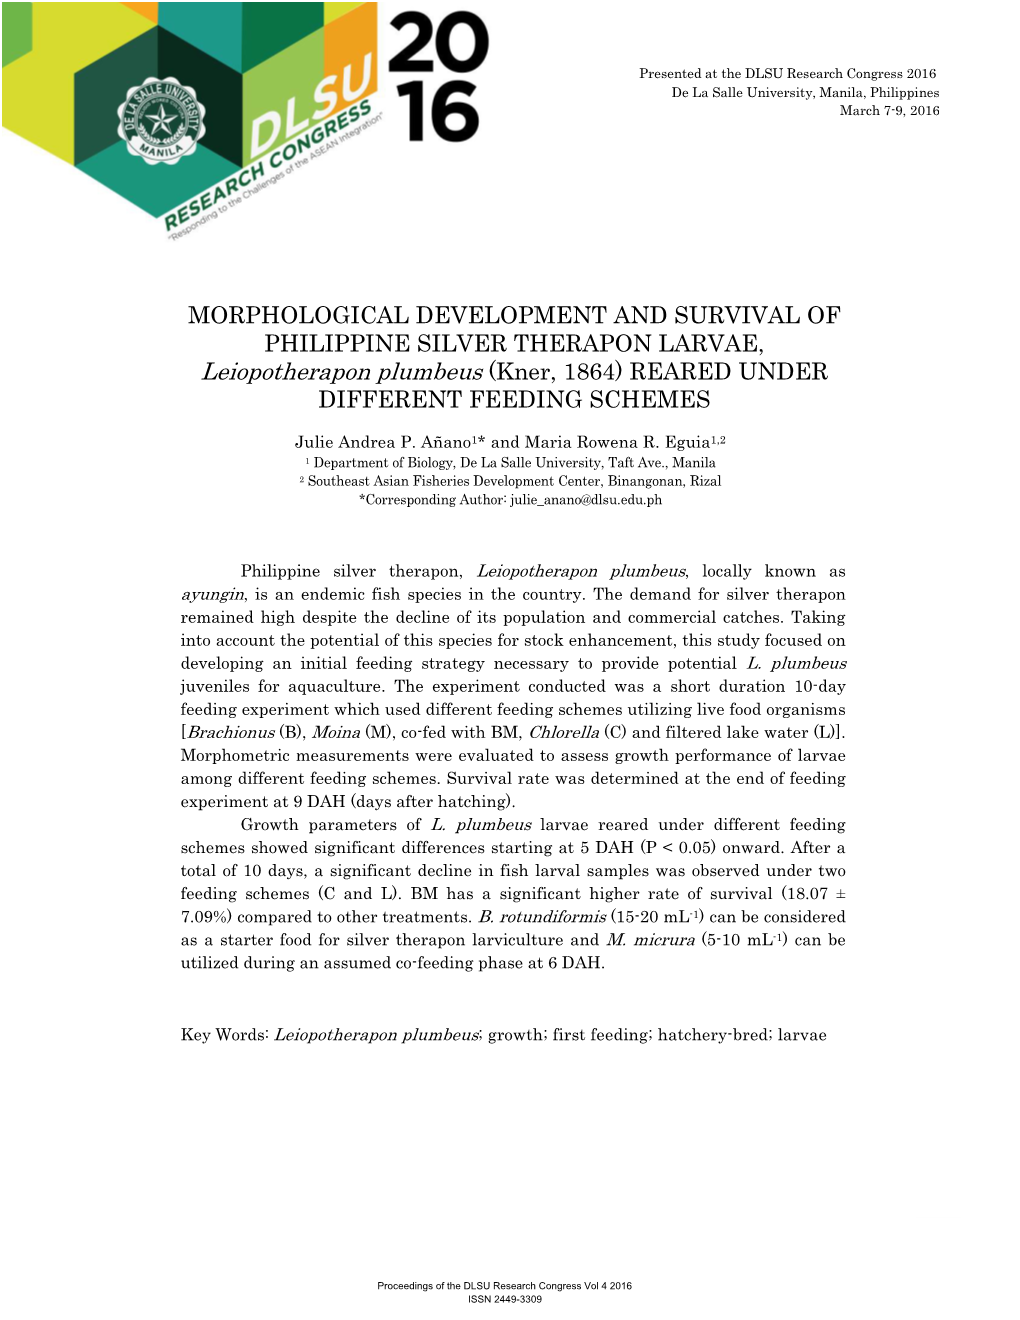 MORPHOLOGICAL DEVELOPMENT and SURVIVAL of PHILIPPINE SILVER THERAPON LARVAE, Leiopotherapon Plumbeus (Kner, 1864) REARED UNDER DIFFERENT FEEDING SCHEMES